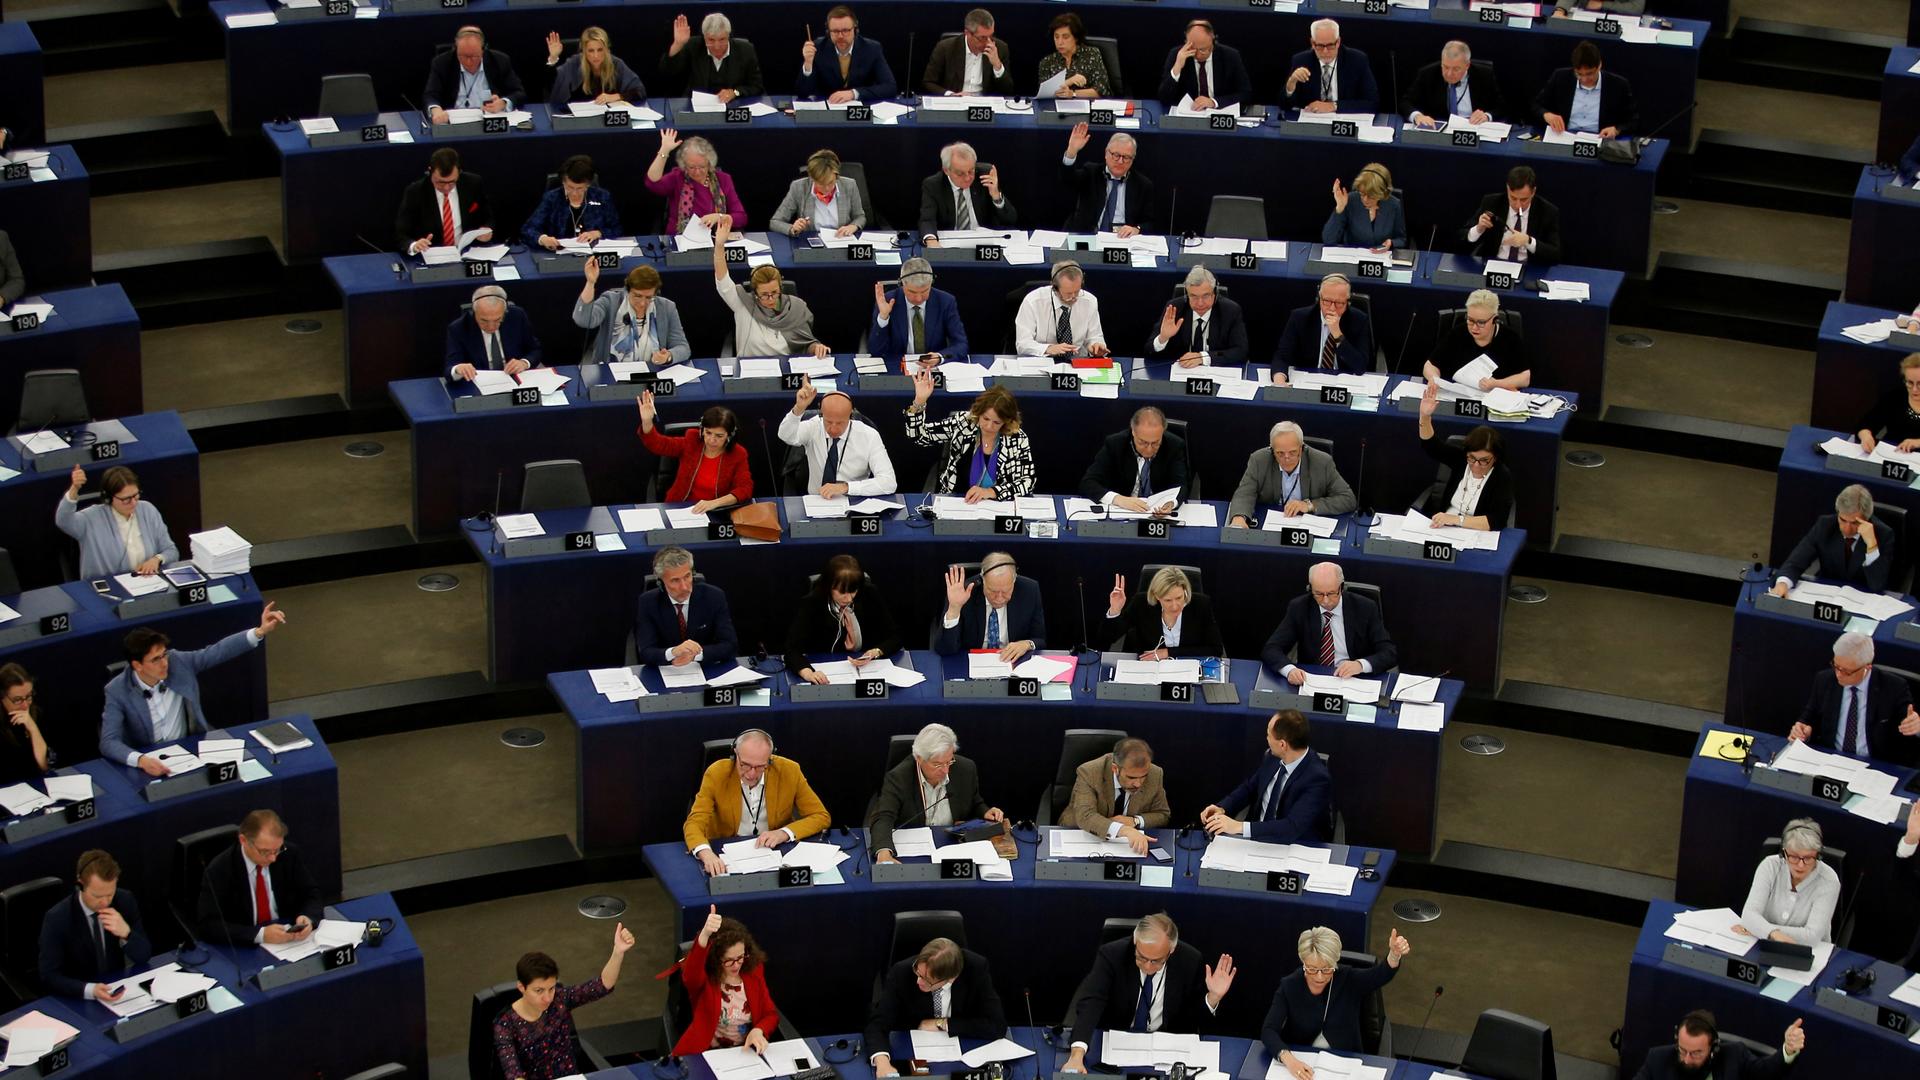 Delegates seated in the European Parliament